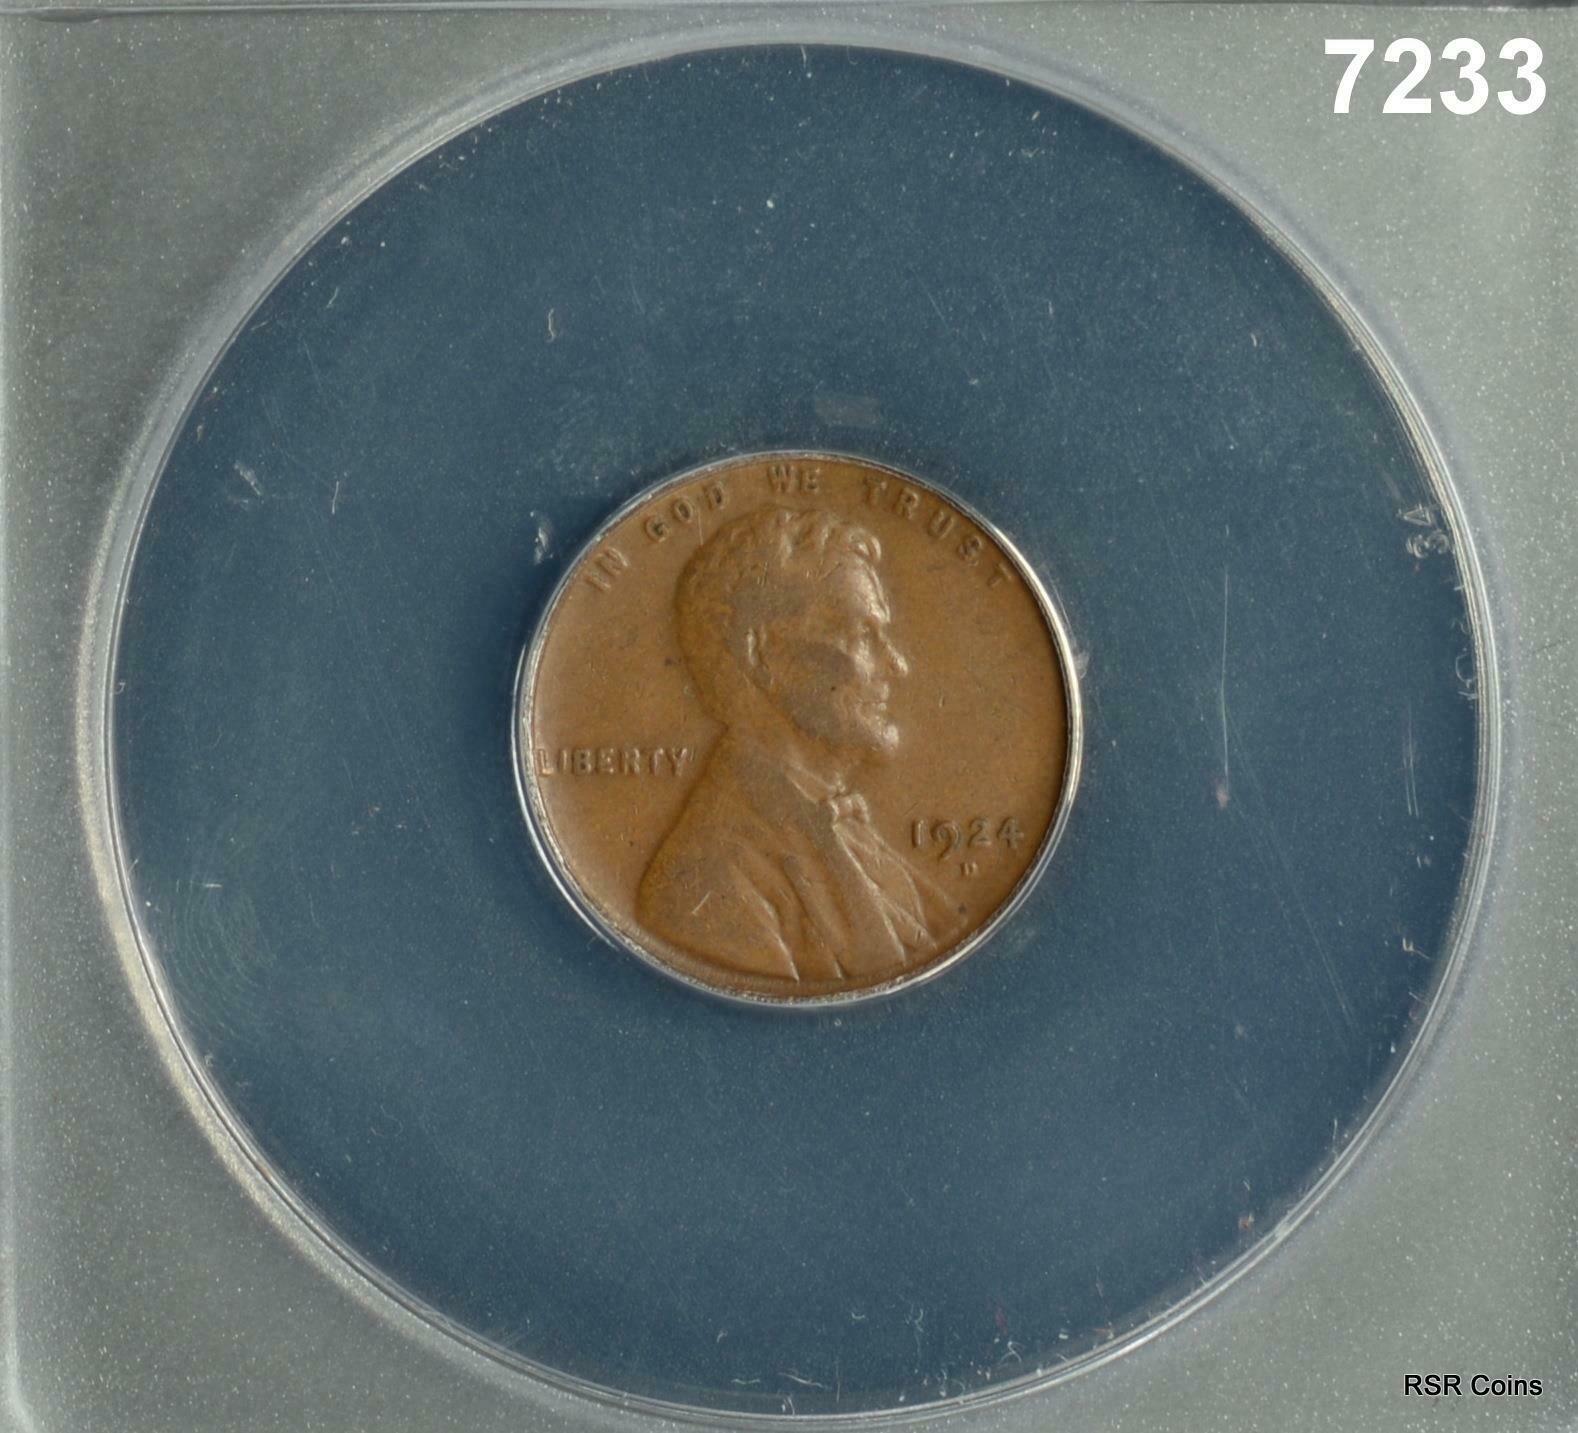 1924 D CENT ANACS CERTIFIED F12 #7233